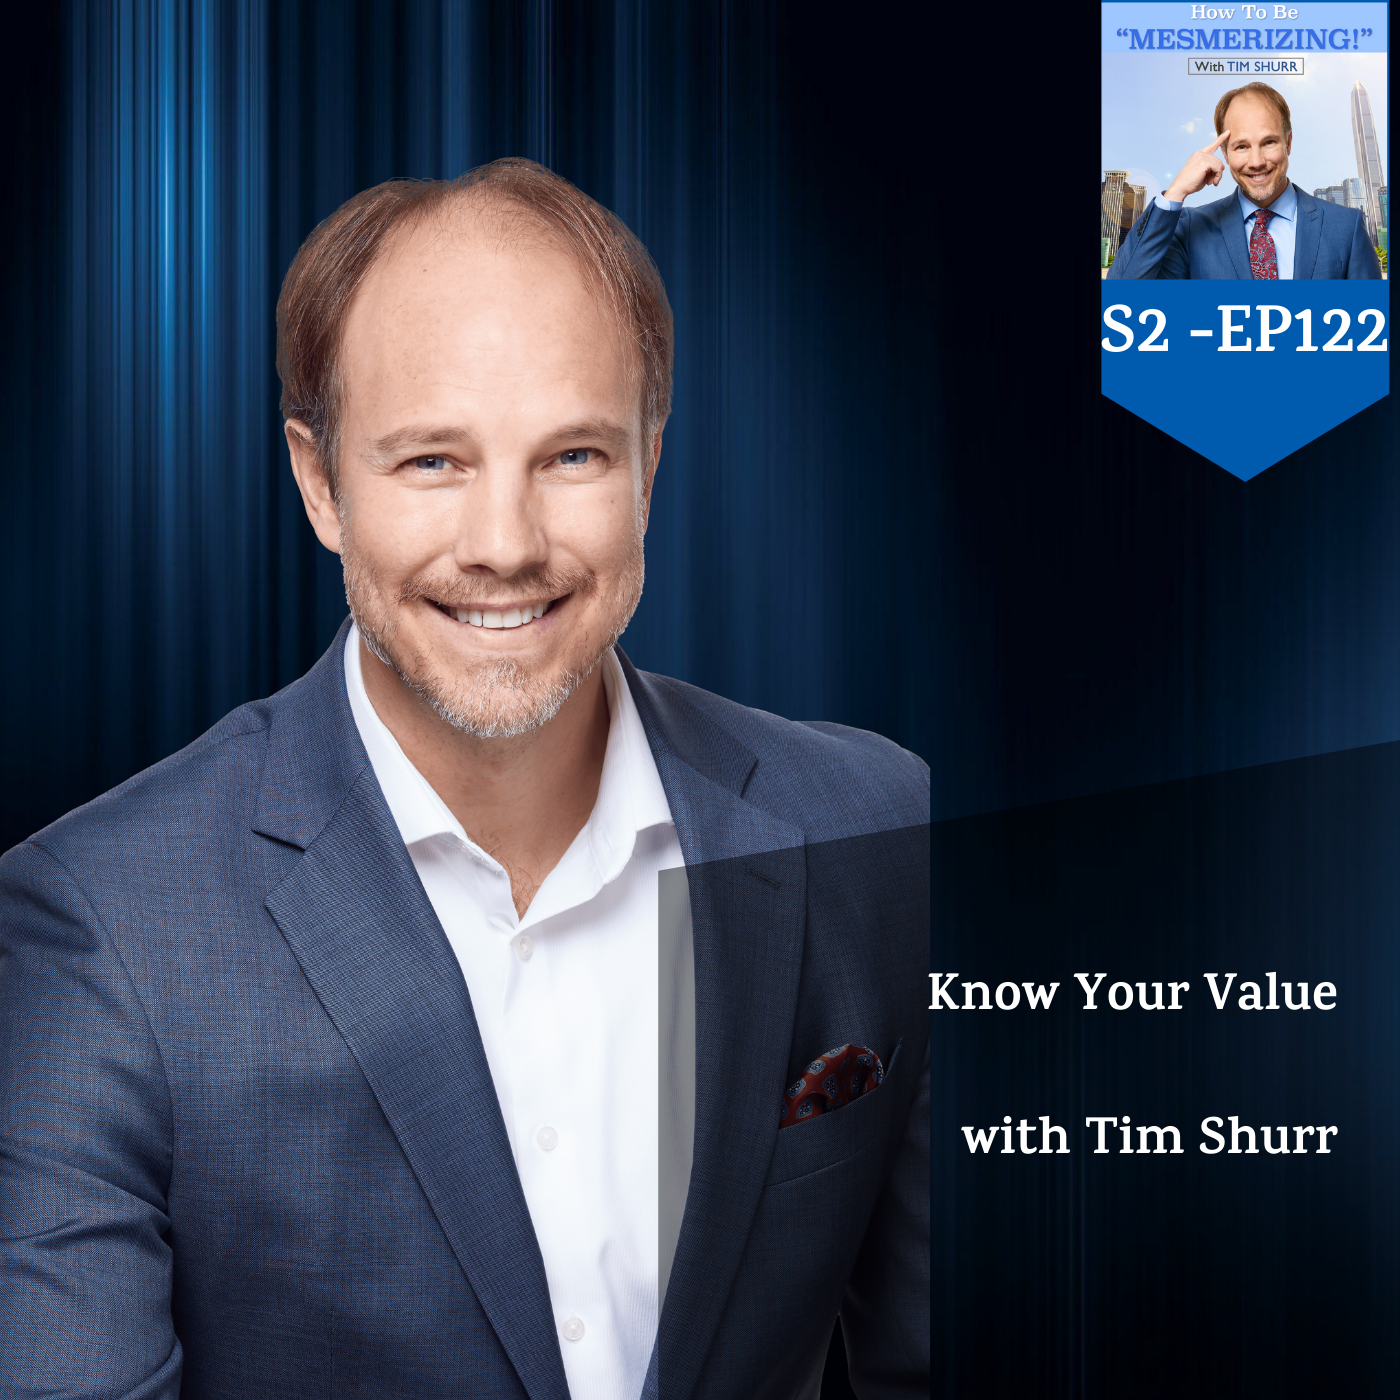 Know Your Value How To Be Mesmerizing With Tim Shurr!